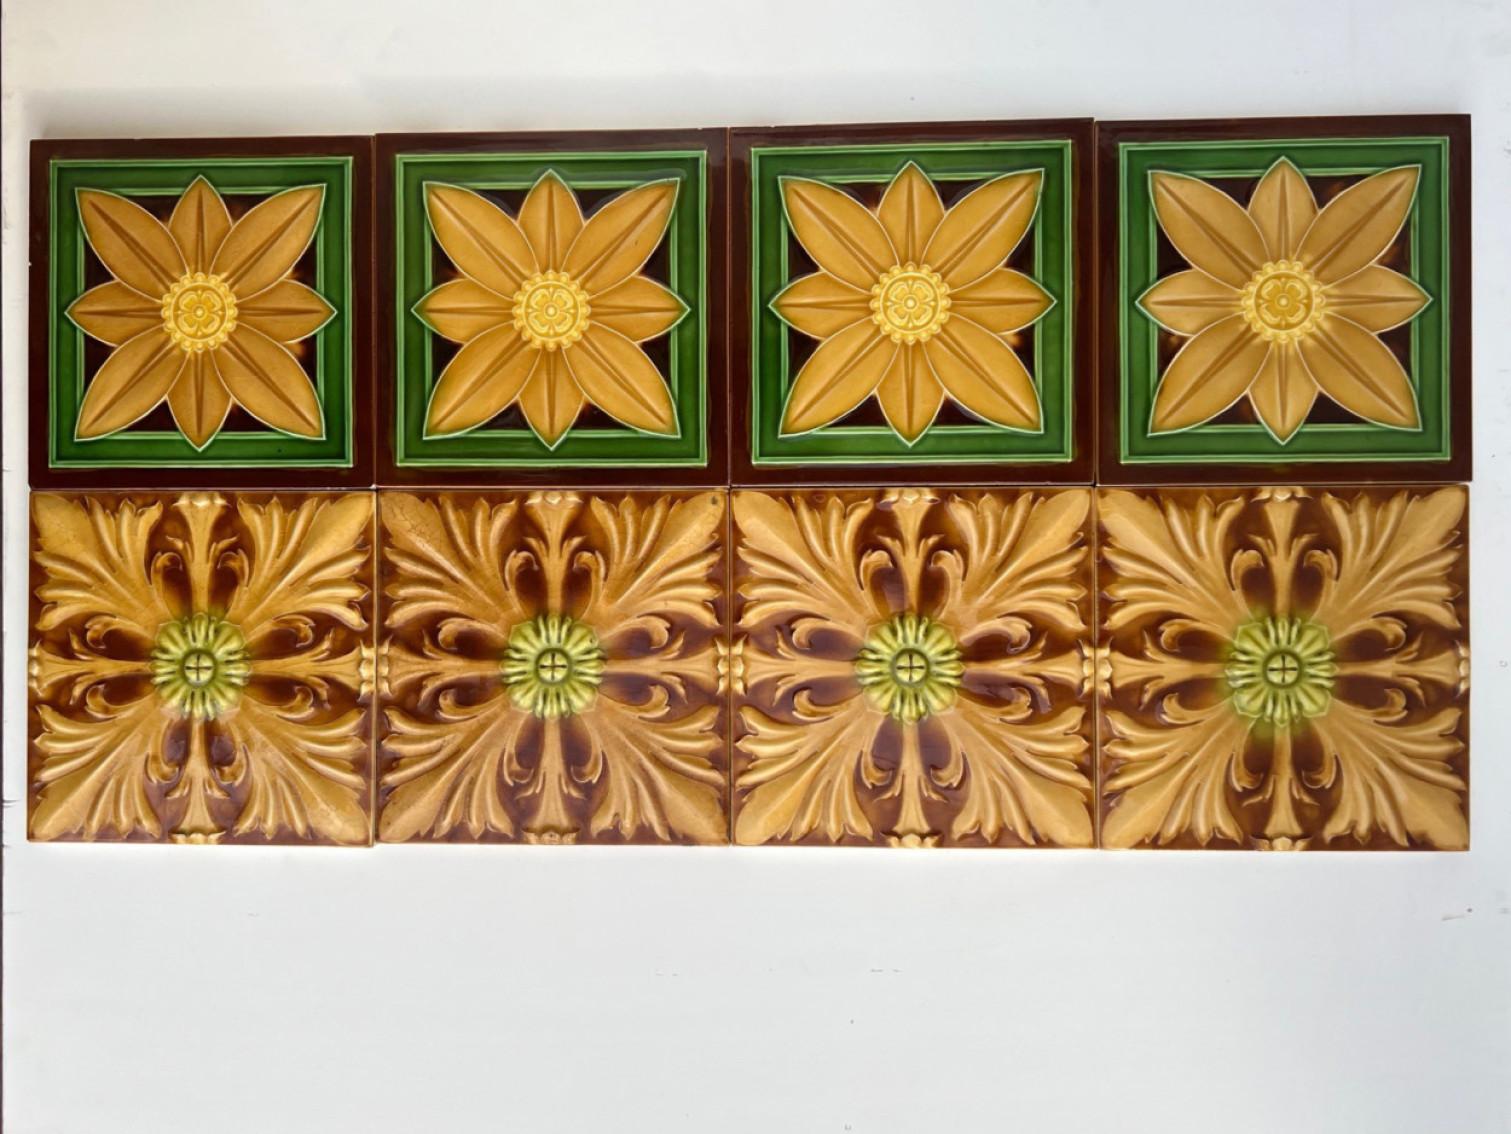 Early 20th Century Mixed Art Deco Relief Tiles by Gilliot, Hemiksem, circa 1920 For Sale